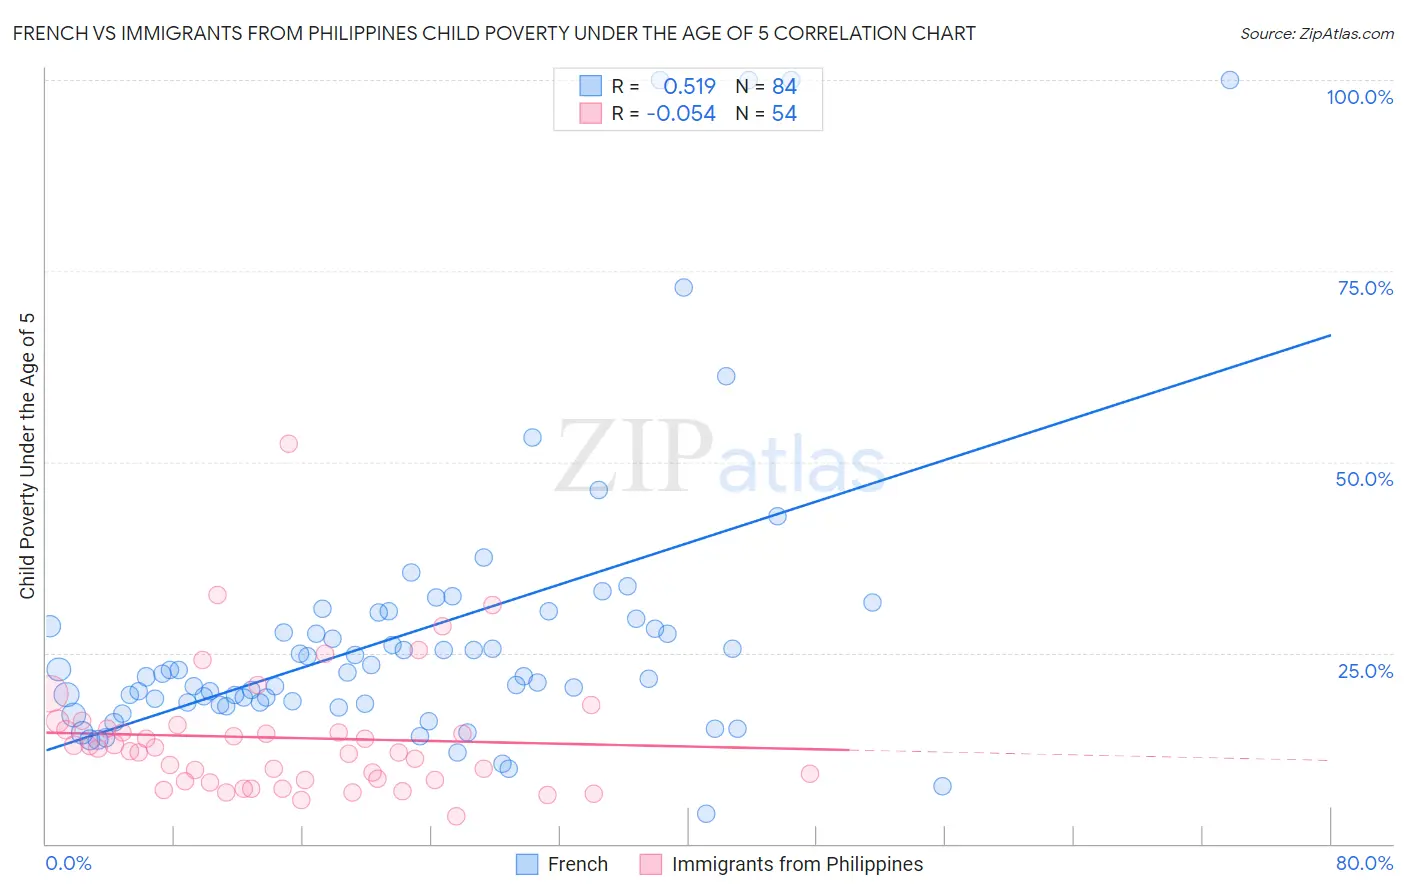 French vs Immigrants from Philippines Child Poverty Under the Age of 5